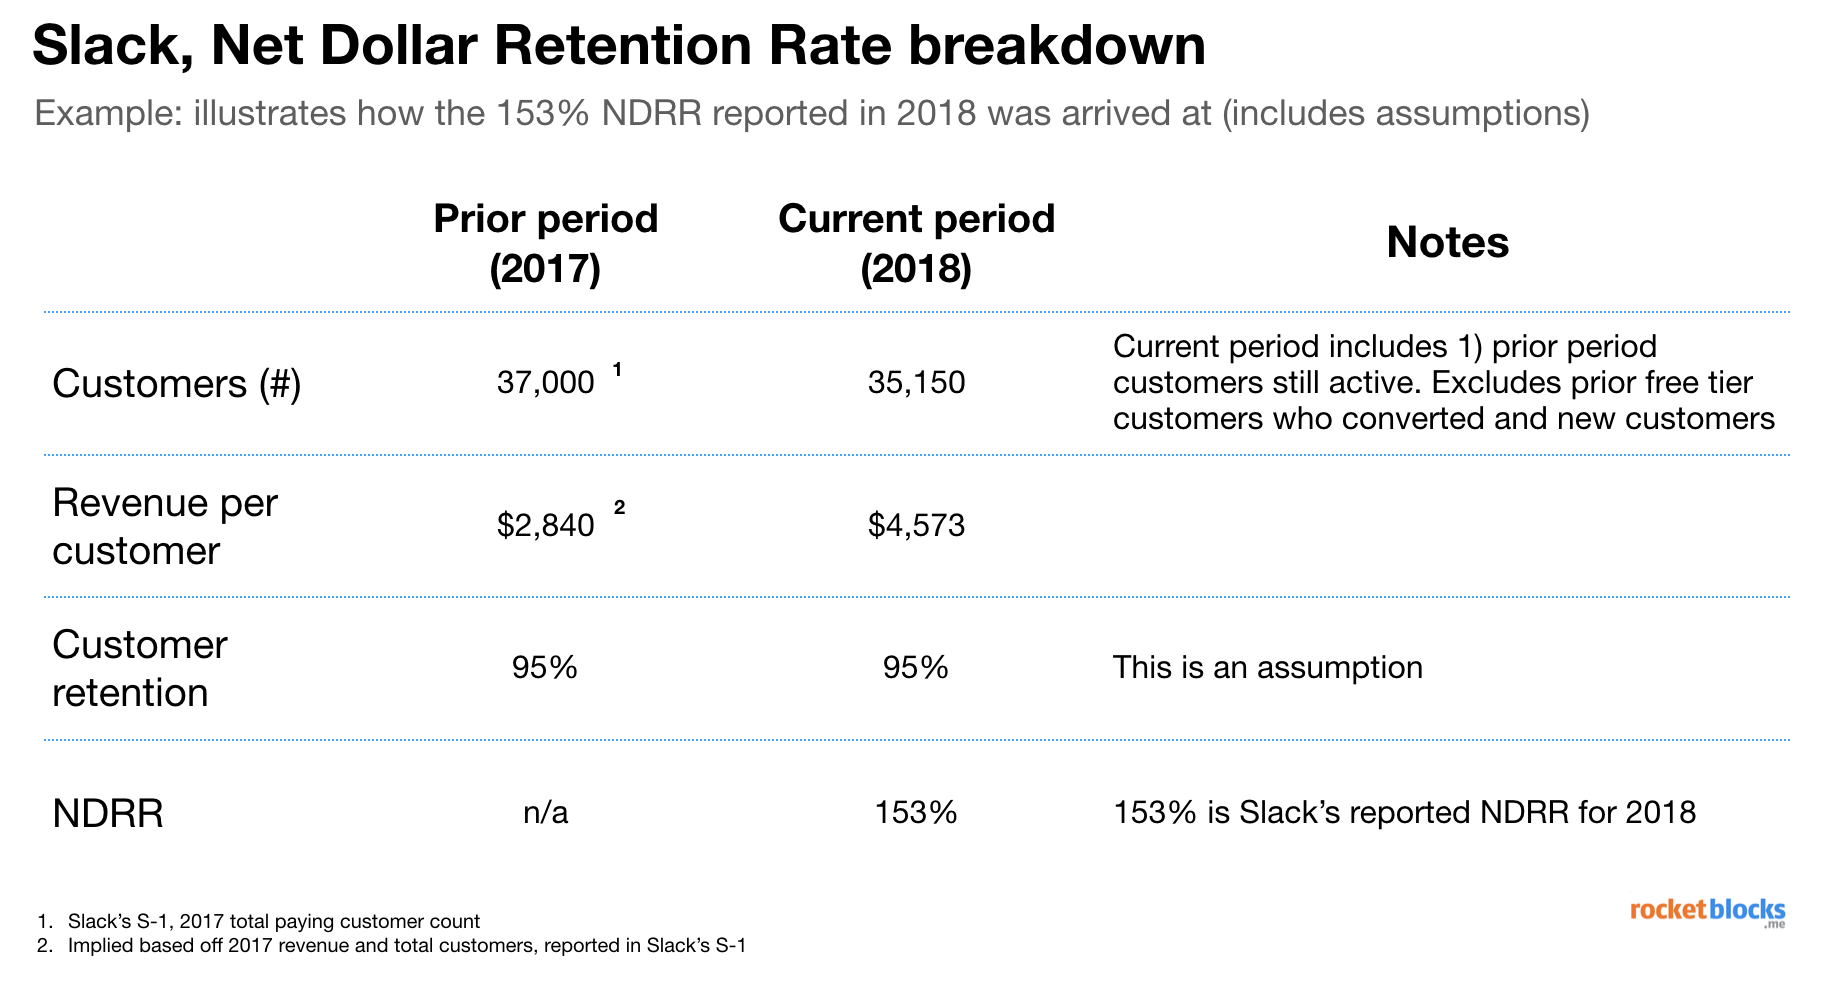 Explaining net dollar retention rate with a Slack example